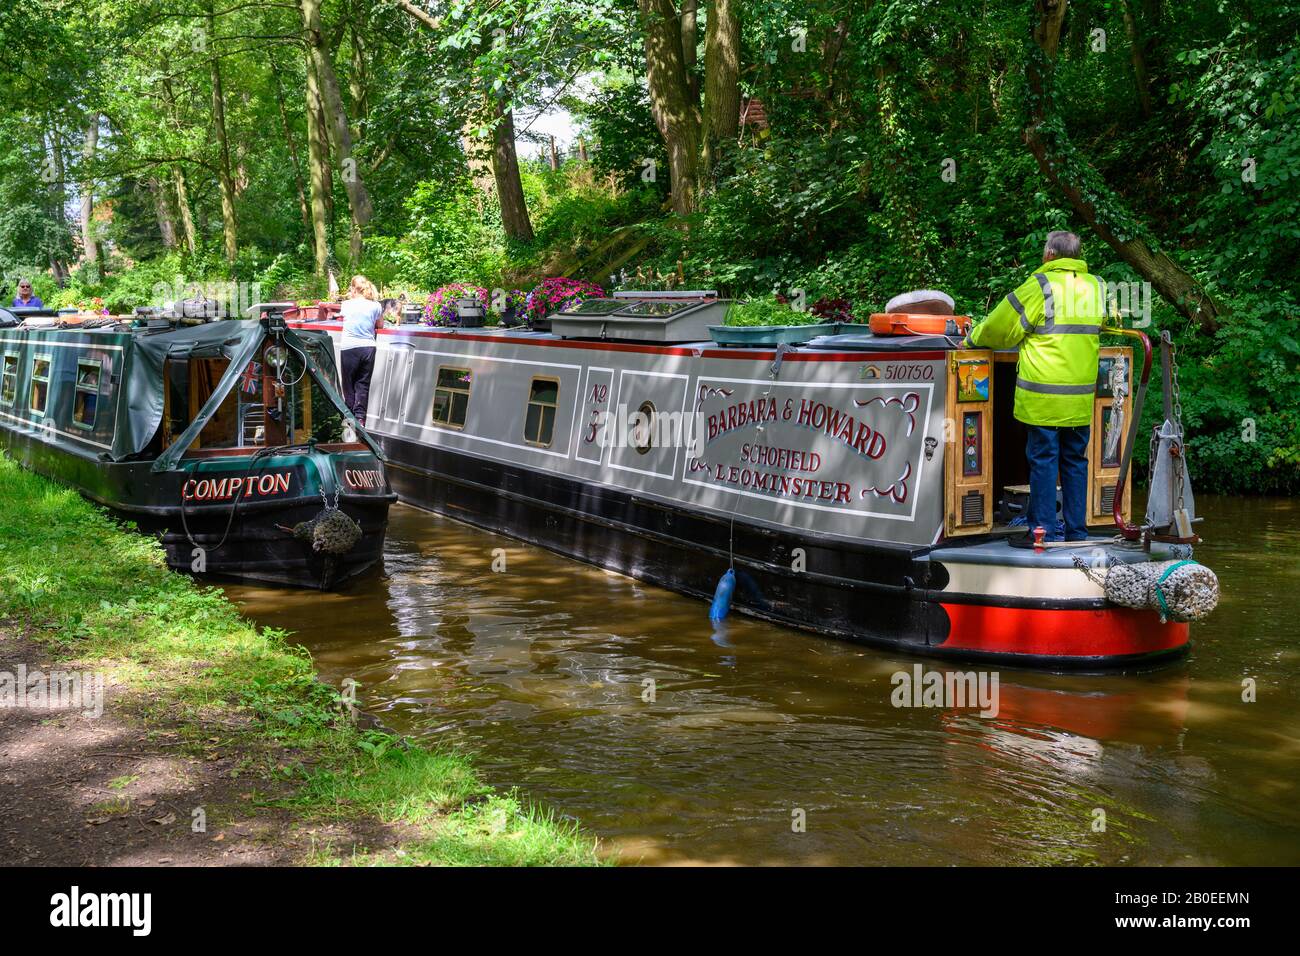 Man on narrowboat tries to manoeuvre past a moored boat on the Shropshire Union Canal near Gnosall in Staffordshire. Stock Photo